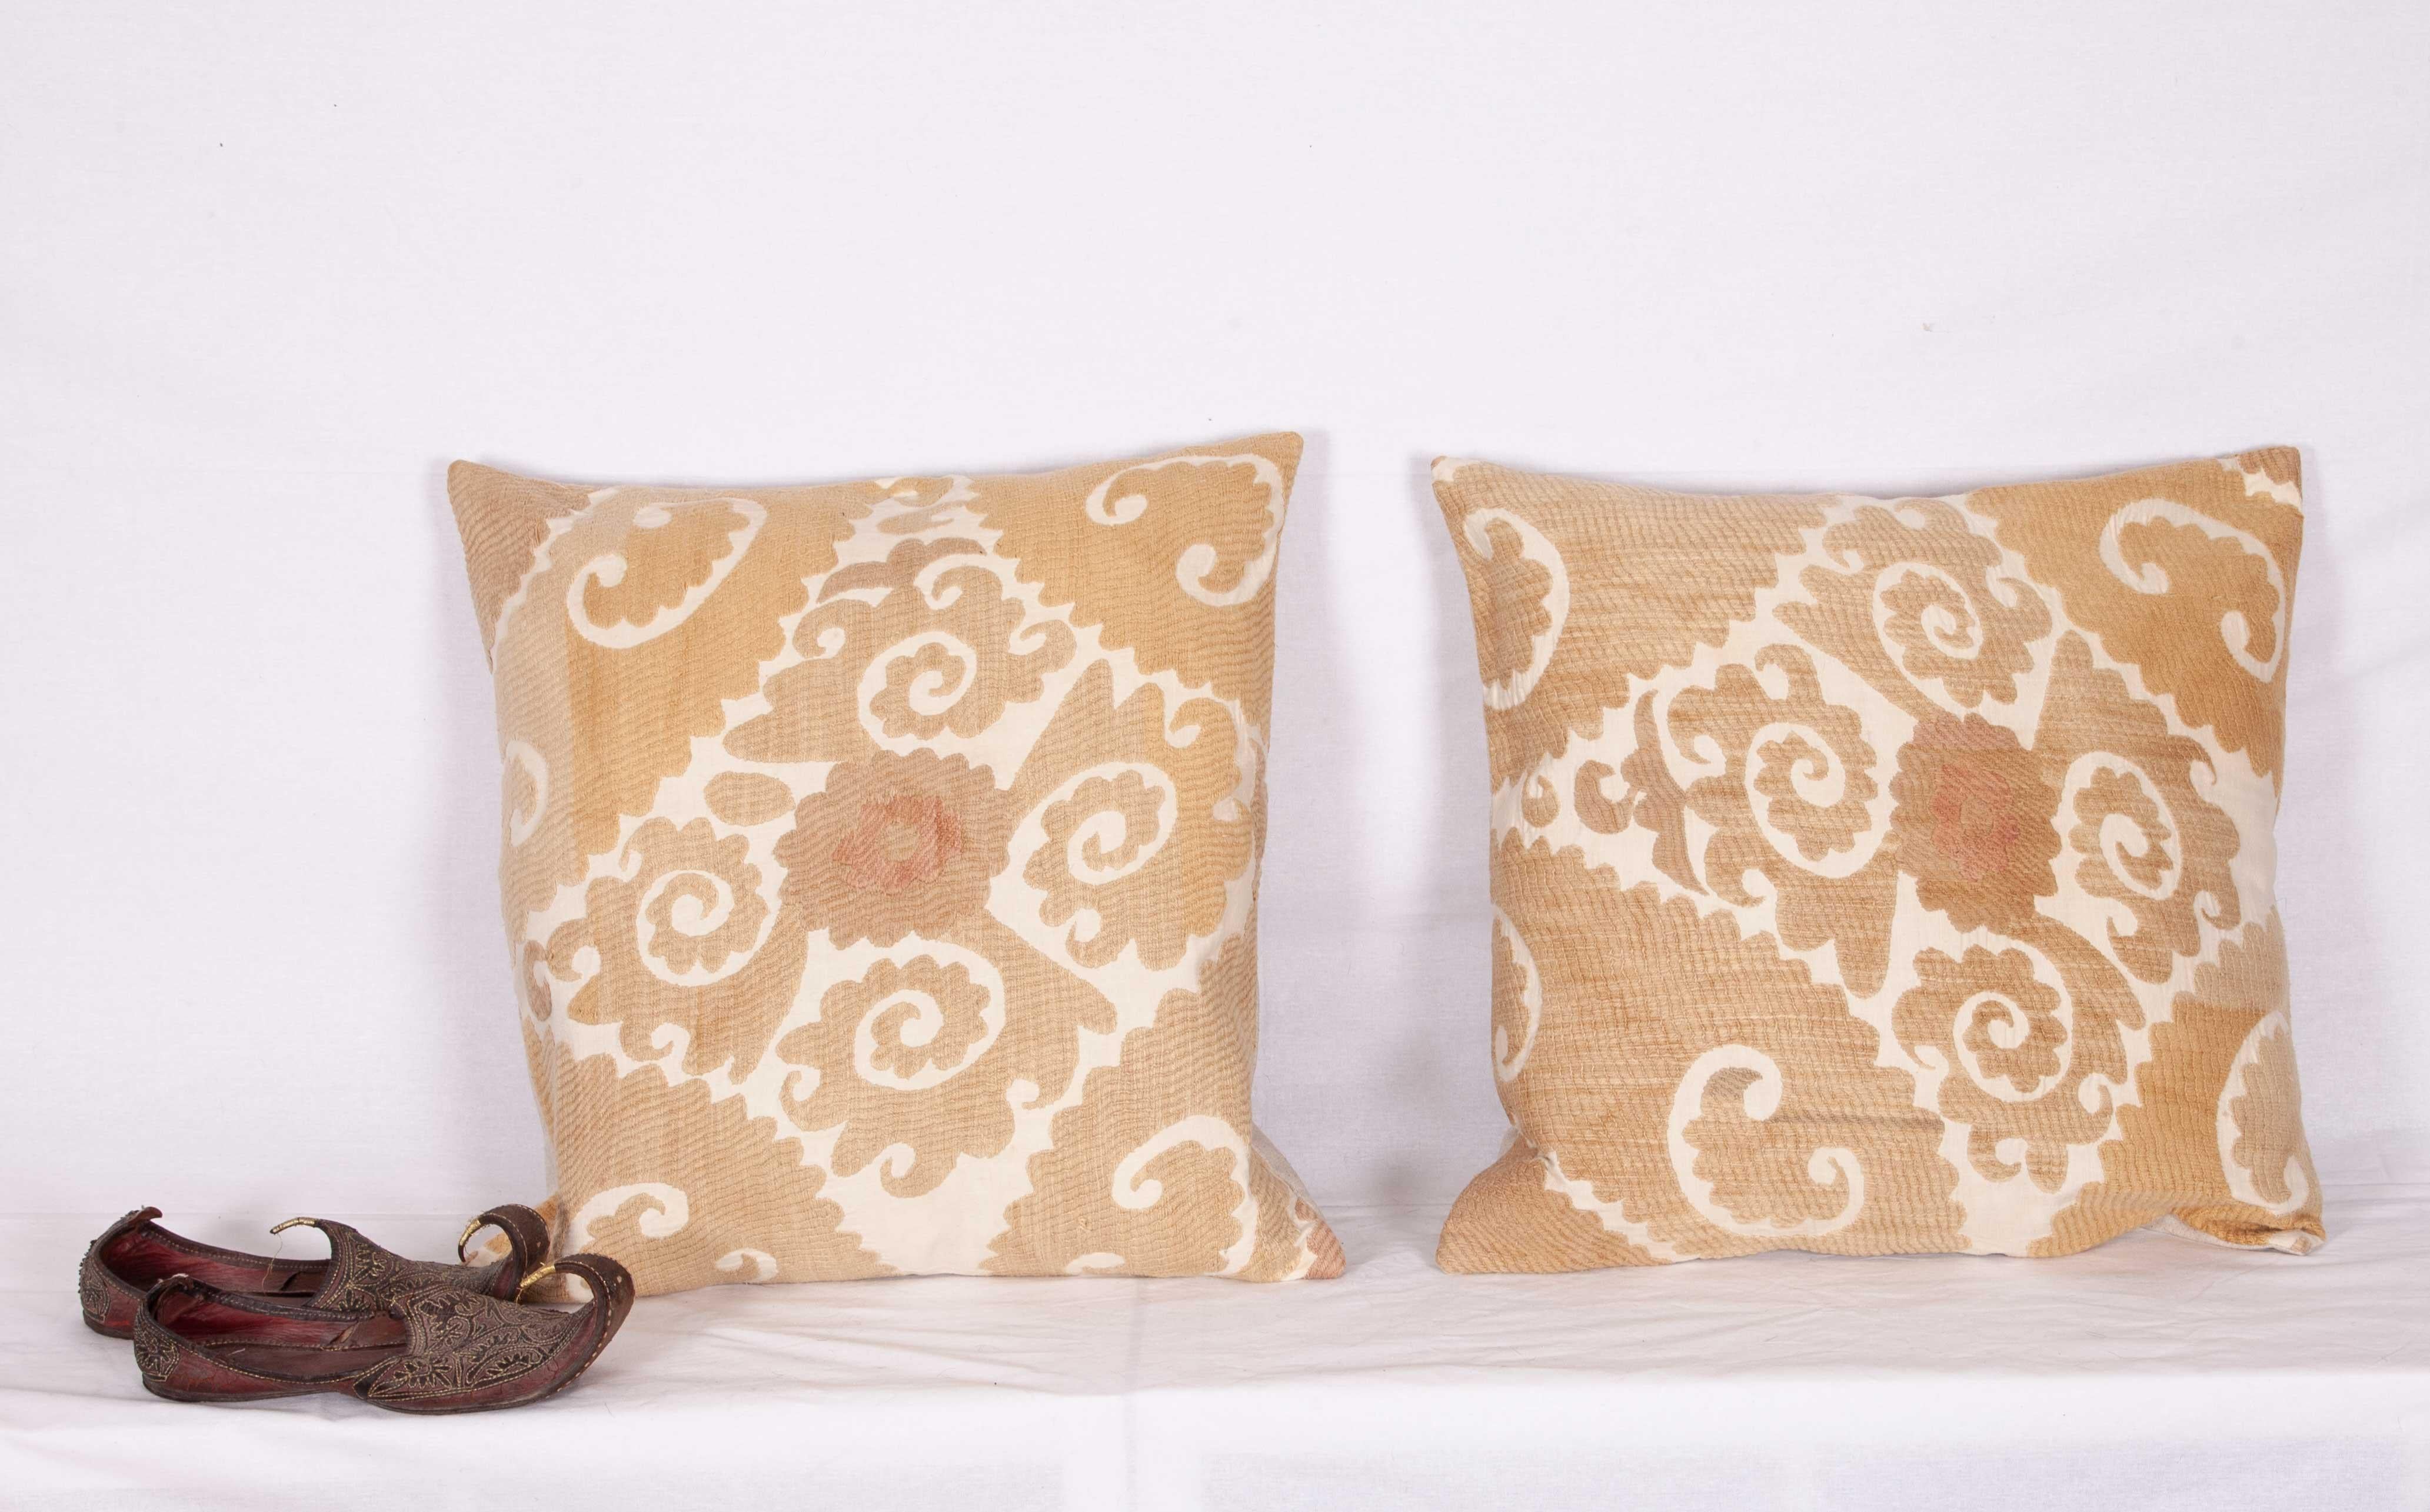 The pillow cases were made out of an mid-20th century, Uzbek Samarkand Suzani. They not come with inserts but come with bags made to the size and out of cotton to accommodate the filling materials. The backing is made of linen. Please note filling